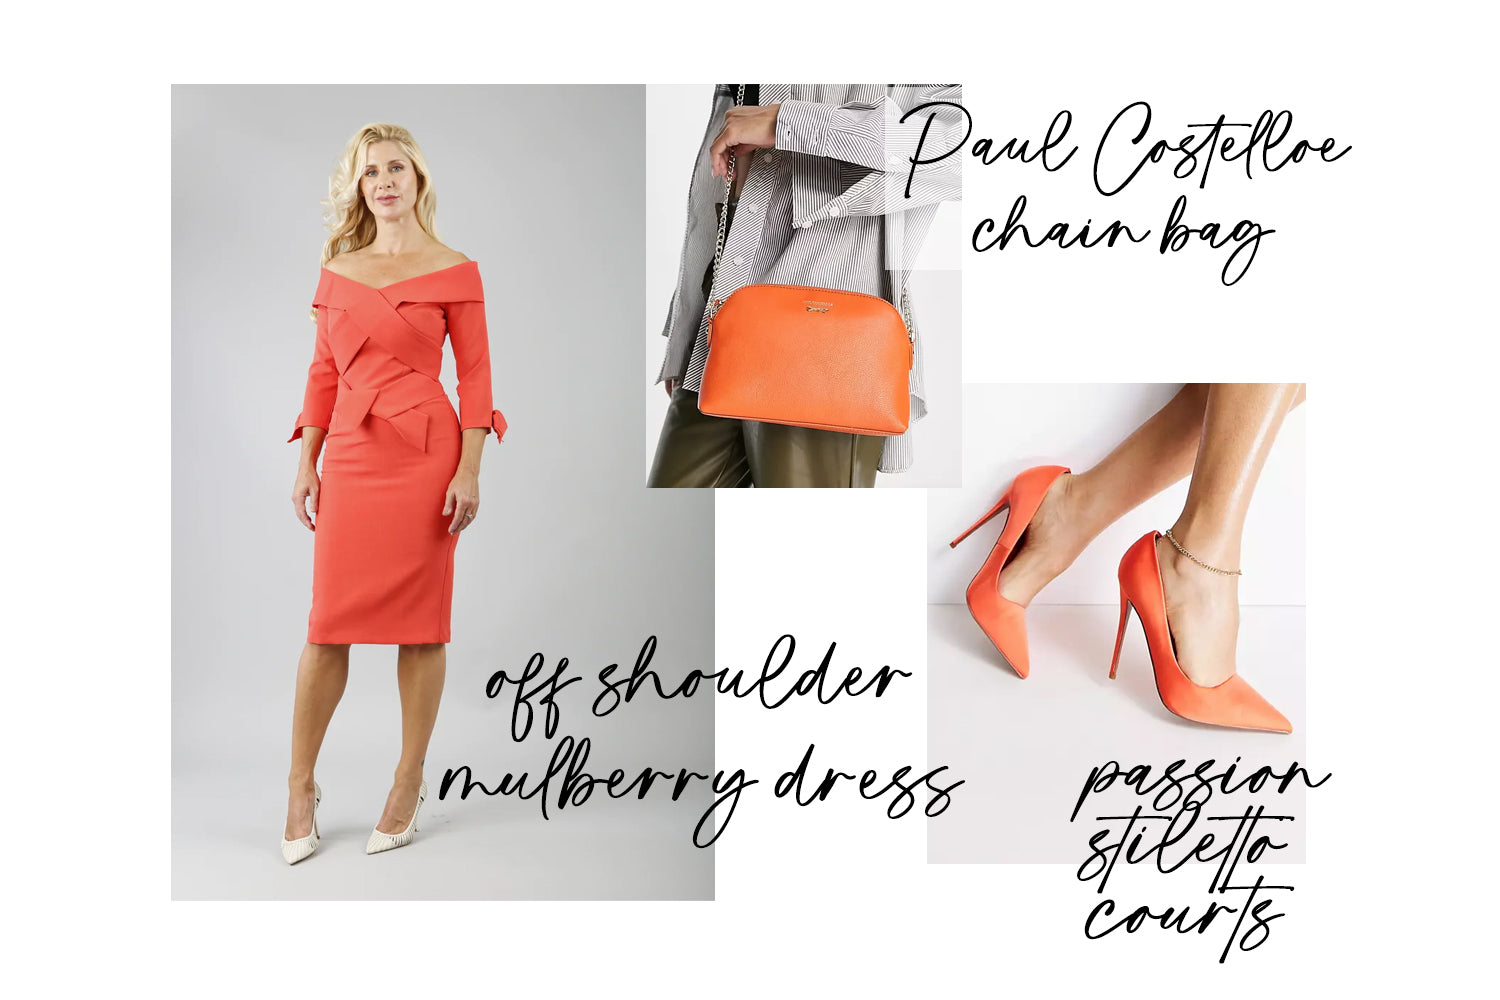 a range of images blended together to show the Mulberry Off-Shoulder dress, a pair of stiletto shoes and orange shaded bag - all with text stating each item.